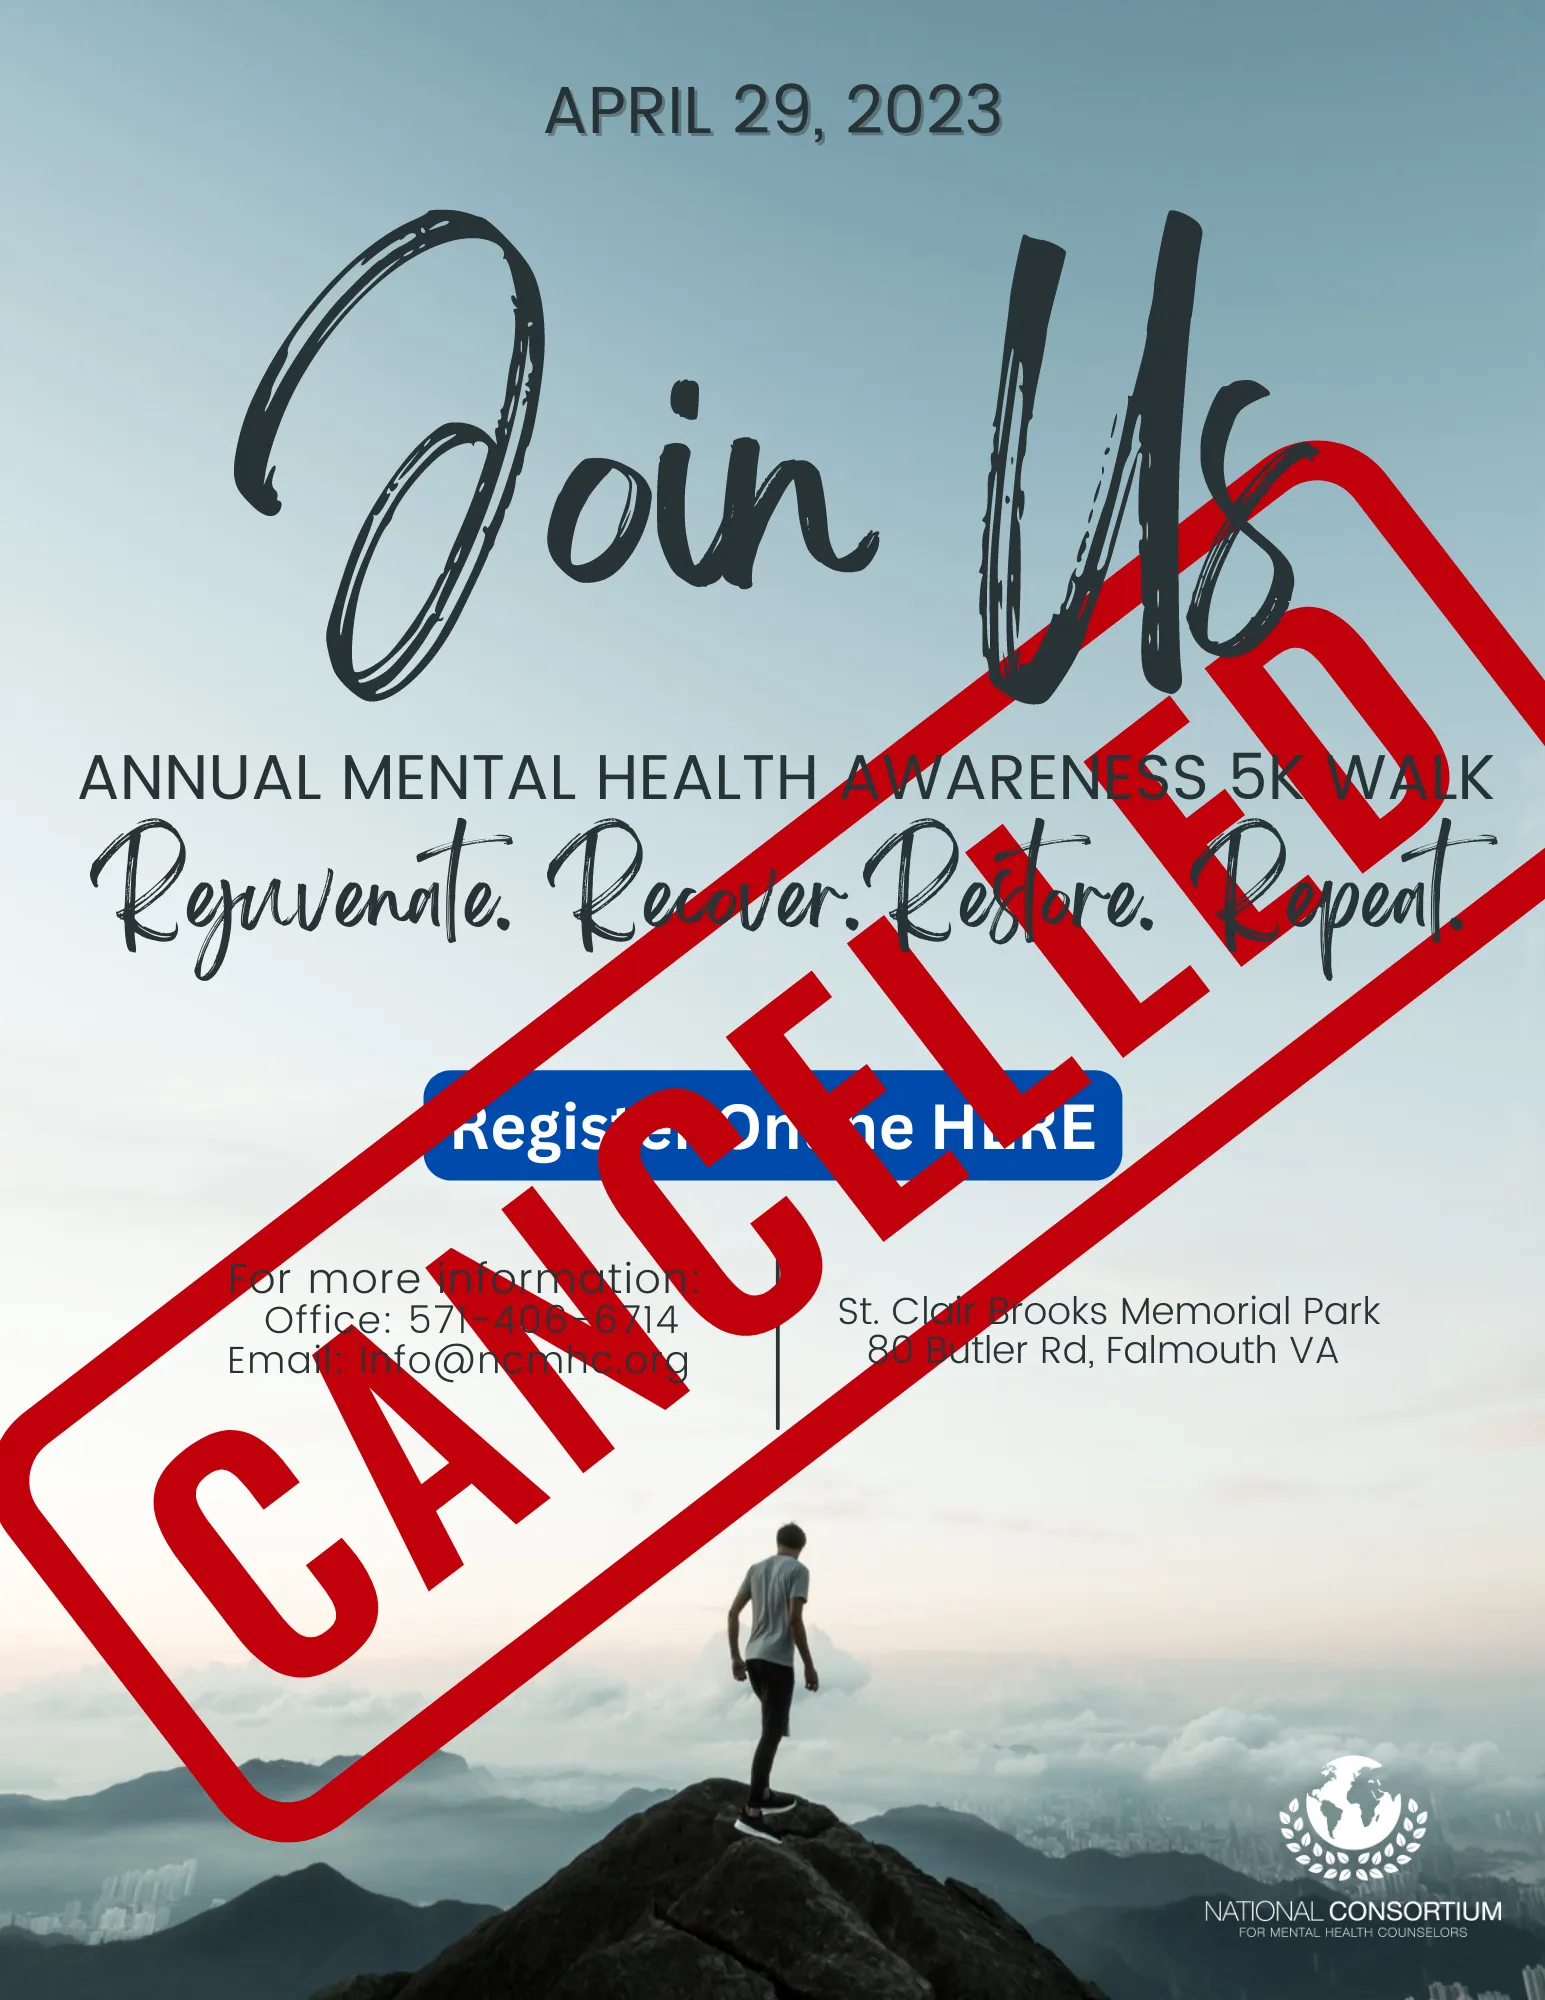 Cancelled Event